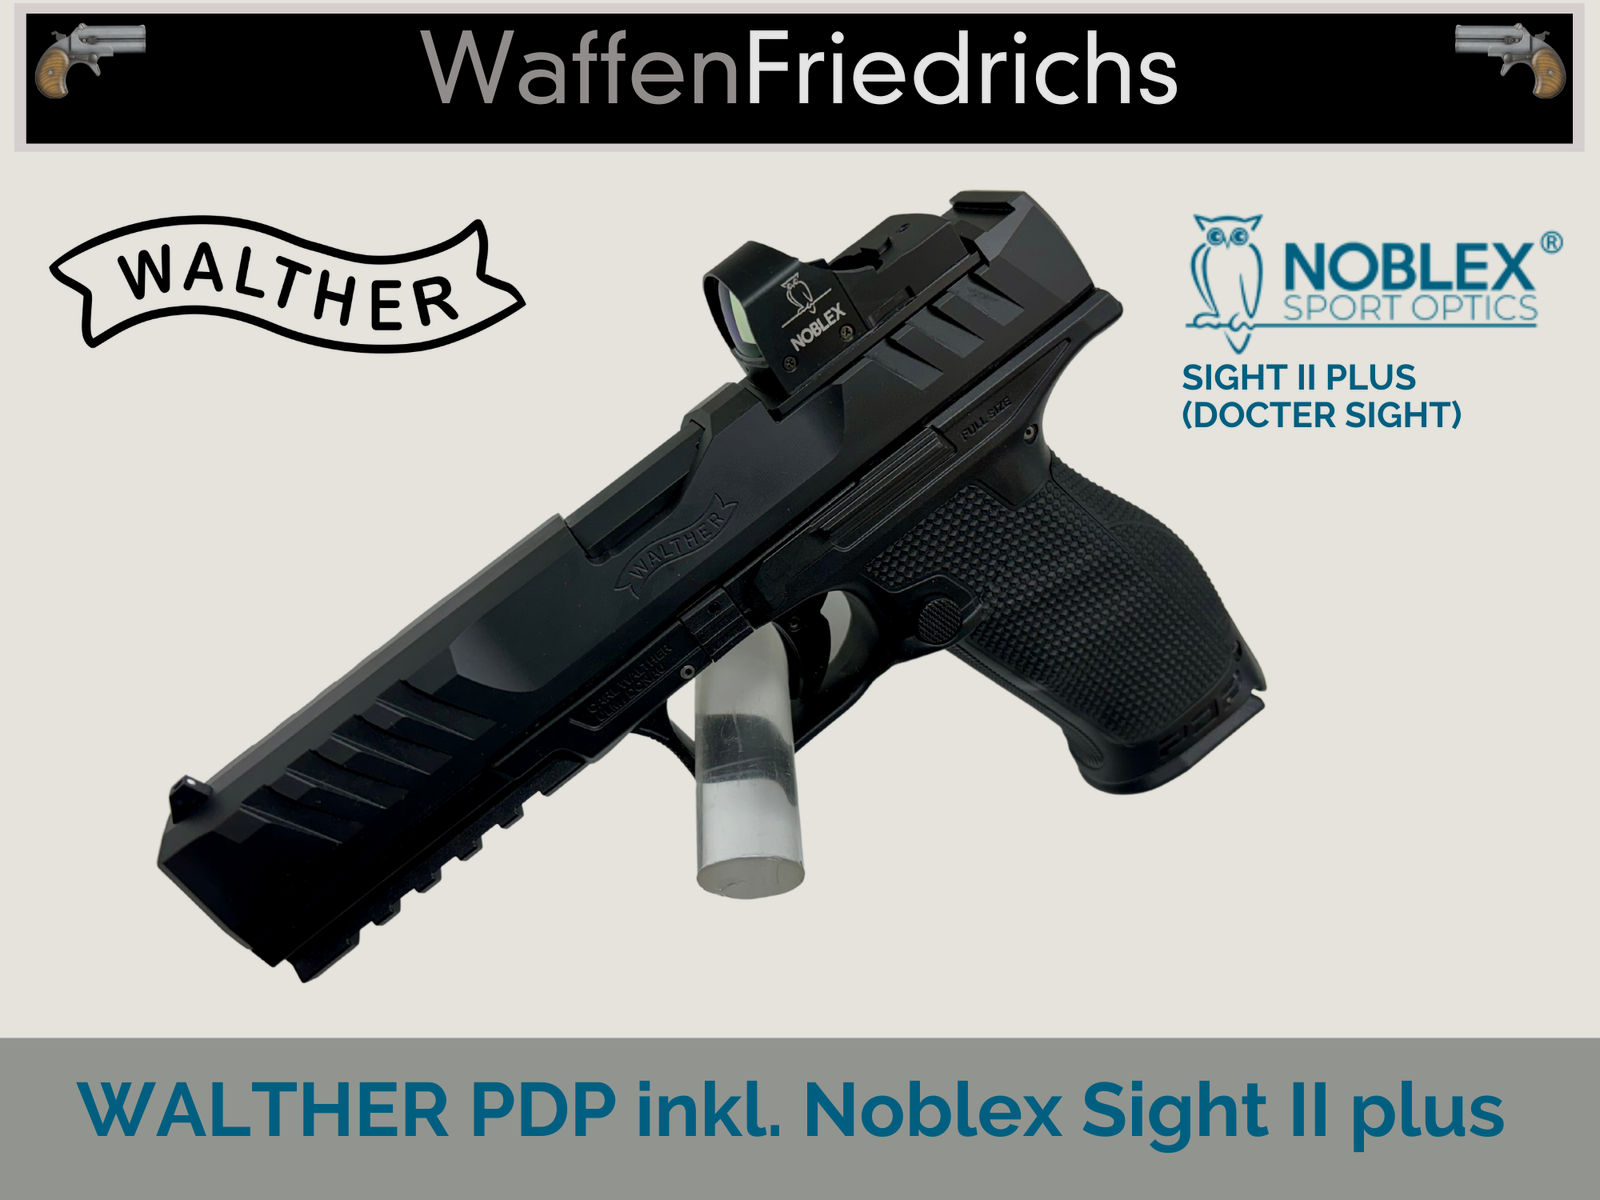 WALTHER PDP 5" Full Size OR inkl. Noblex Docter Sight - WaffenFriedrichs 